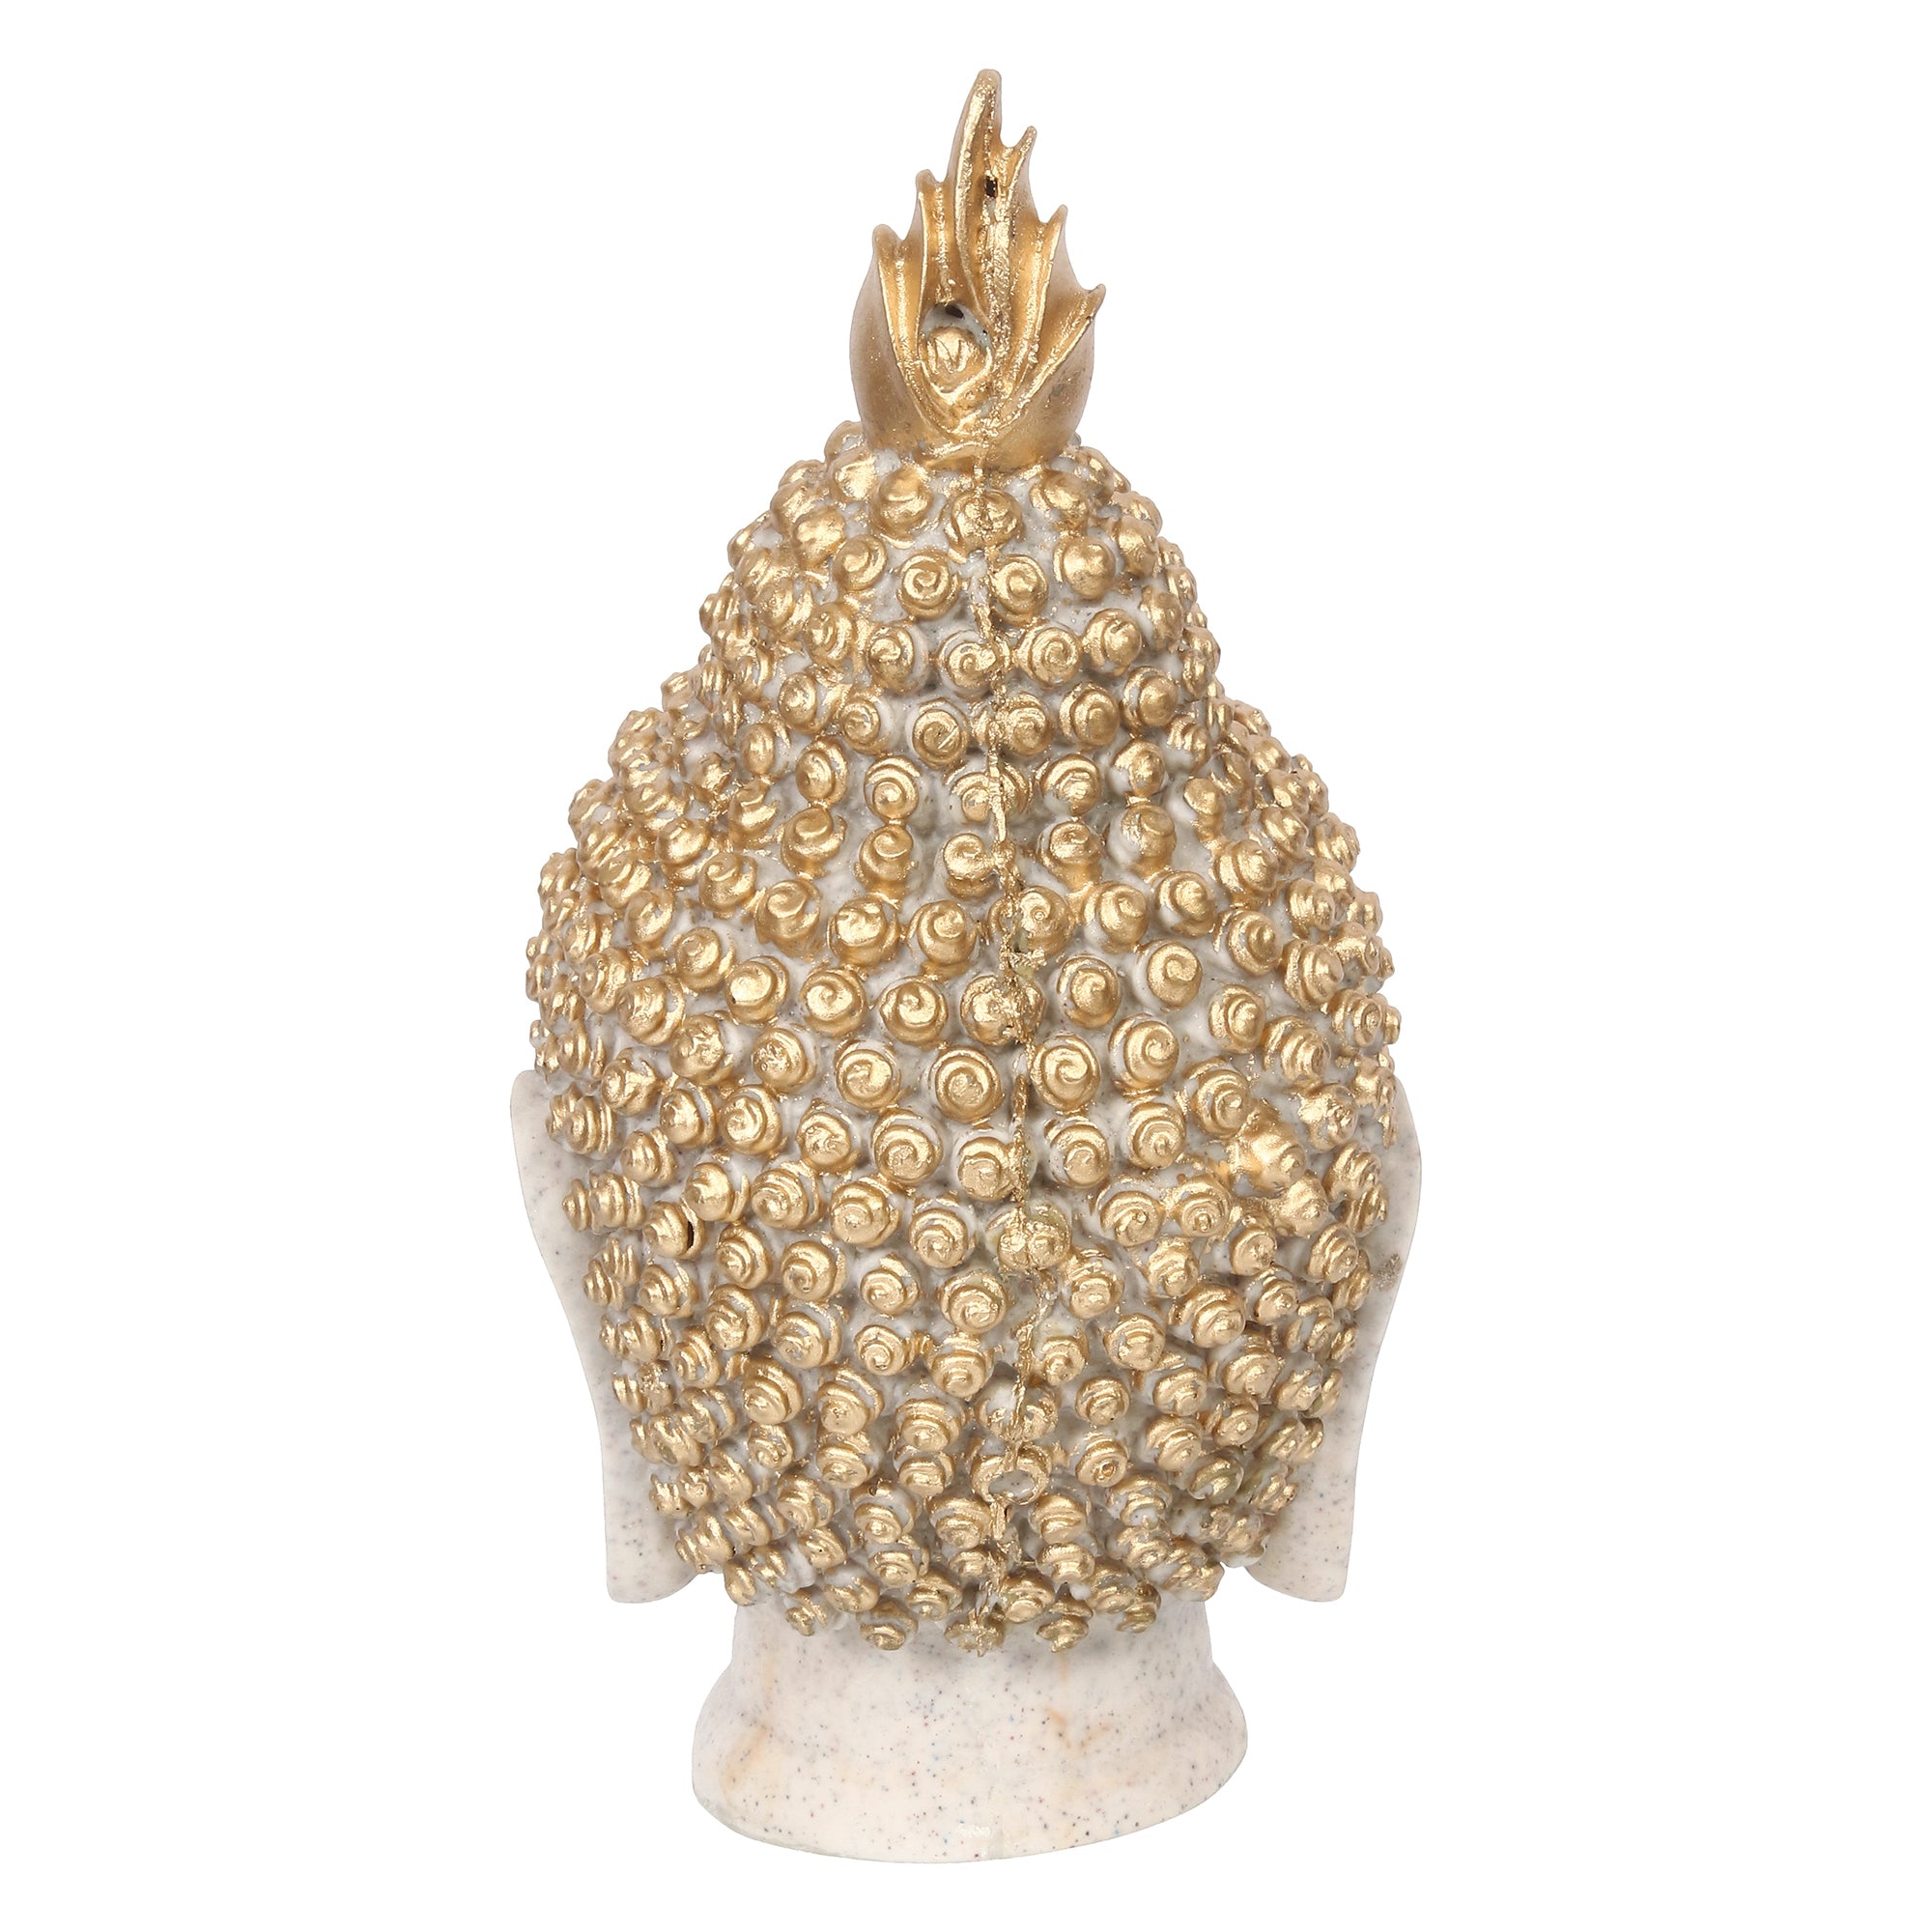 Polyresin Gold and White Meditating Buddha Head Statue 5